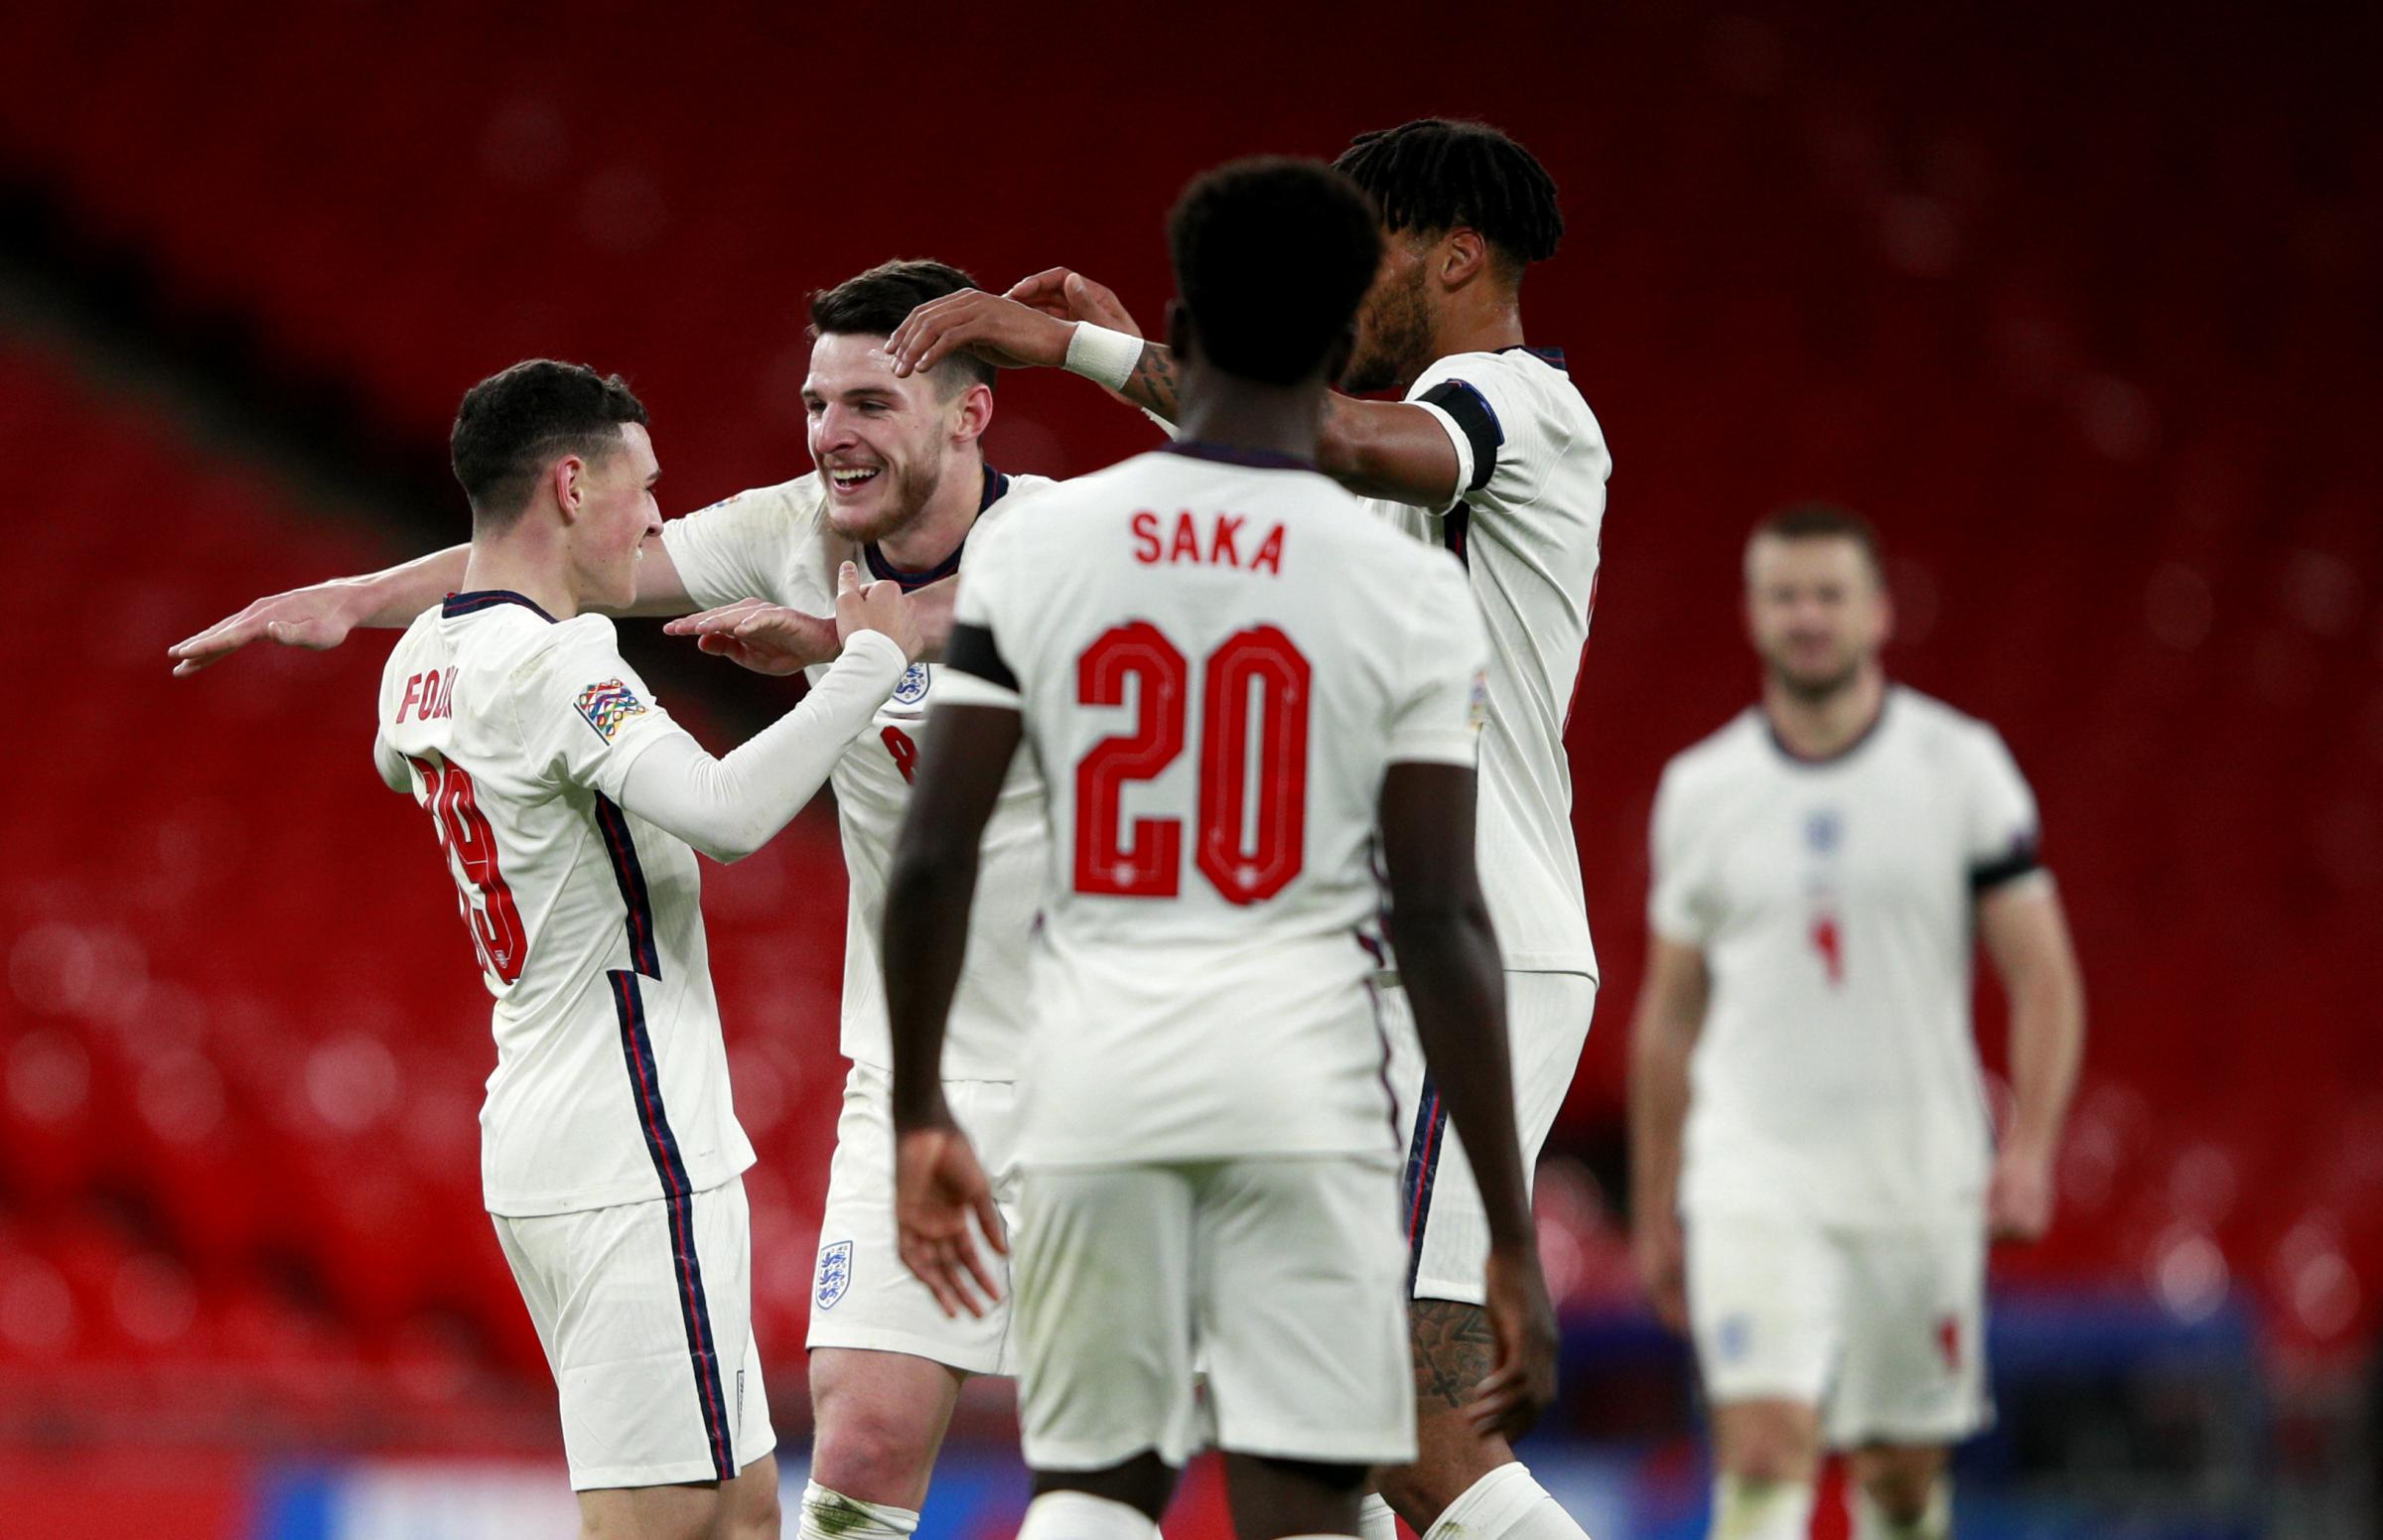 Englands Phil Foden (left) celebrates scoring his sides fourth goal of the game with team-mates during the UEFA Nations League Group A2 match at Wembley Stadium, London. PA Photo. Picture date: Wednesday November 18, 2020. See PA story SOCCER England.